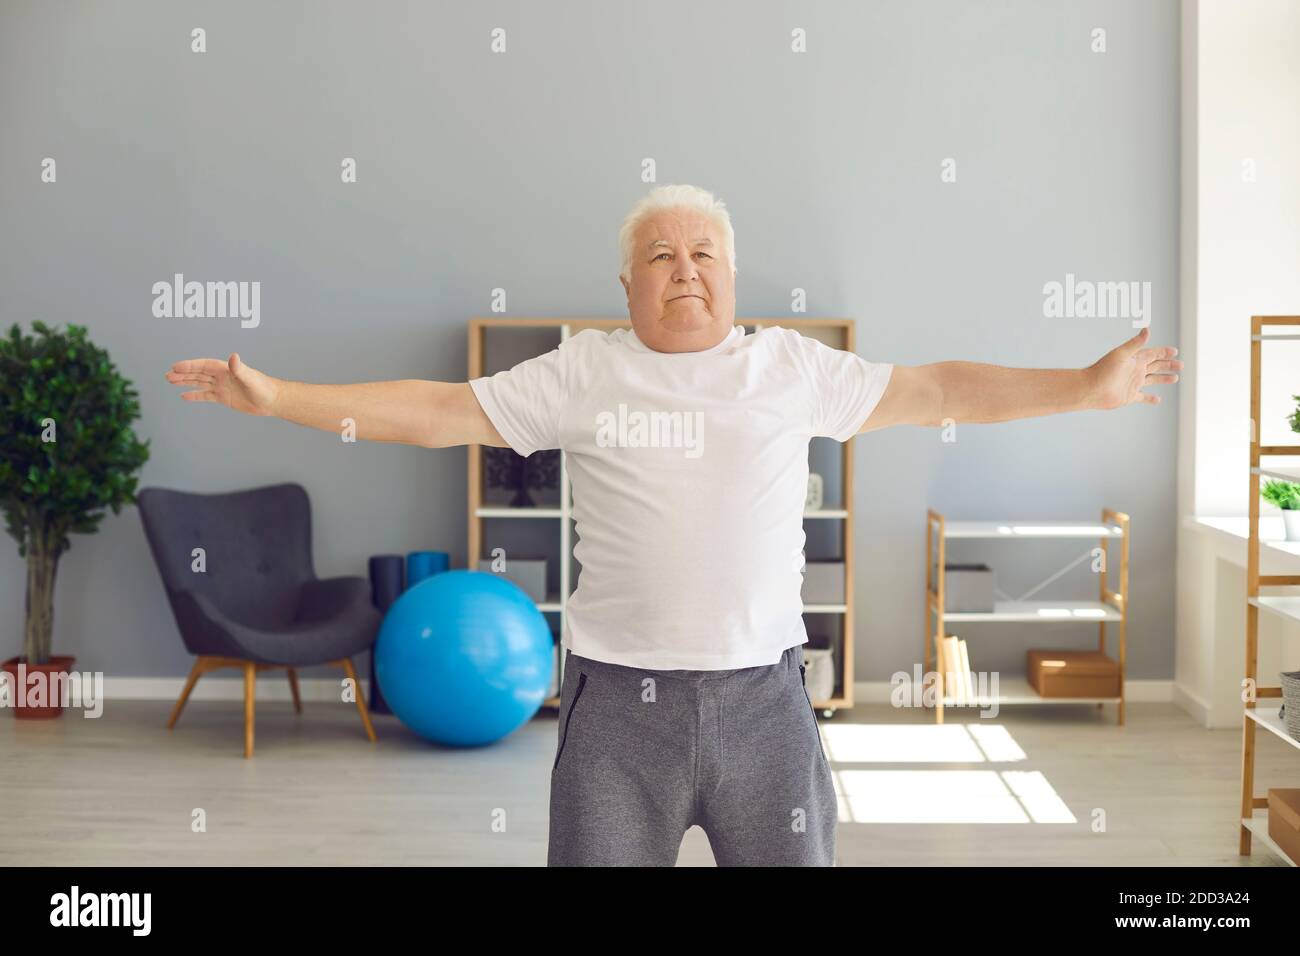 Mature gray haired man doing exercises or light fitness workout at home or rehabilitation clinic Stock Photo